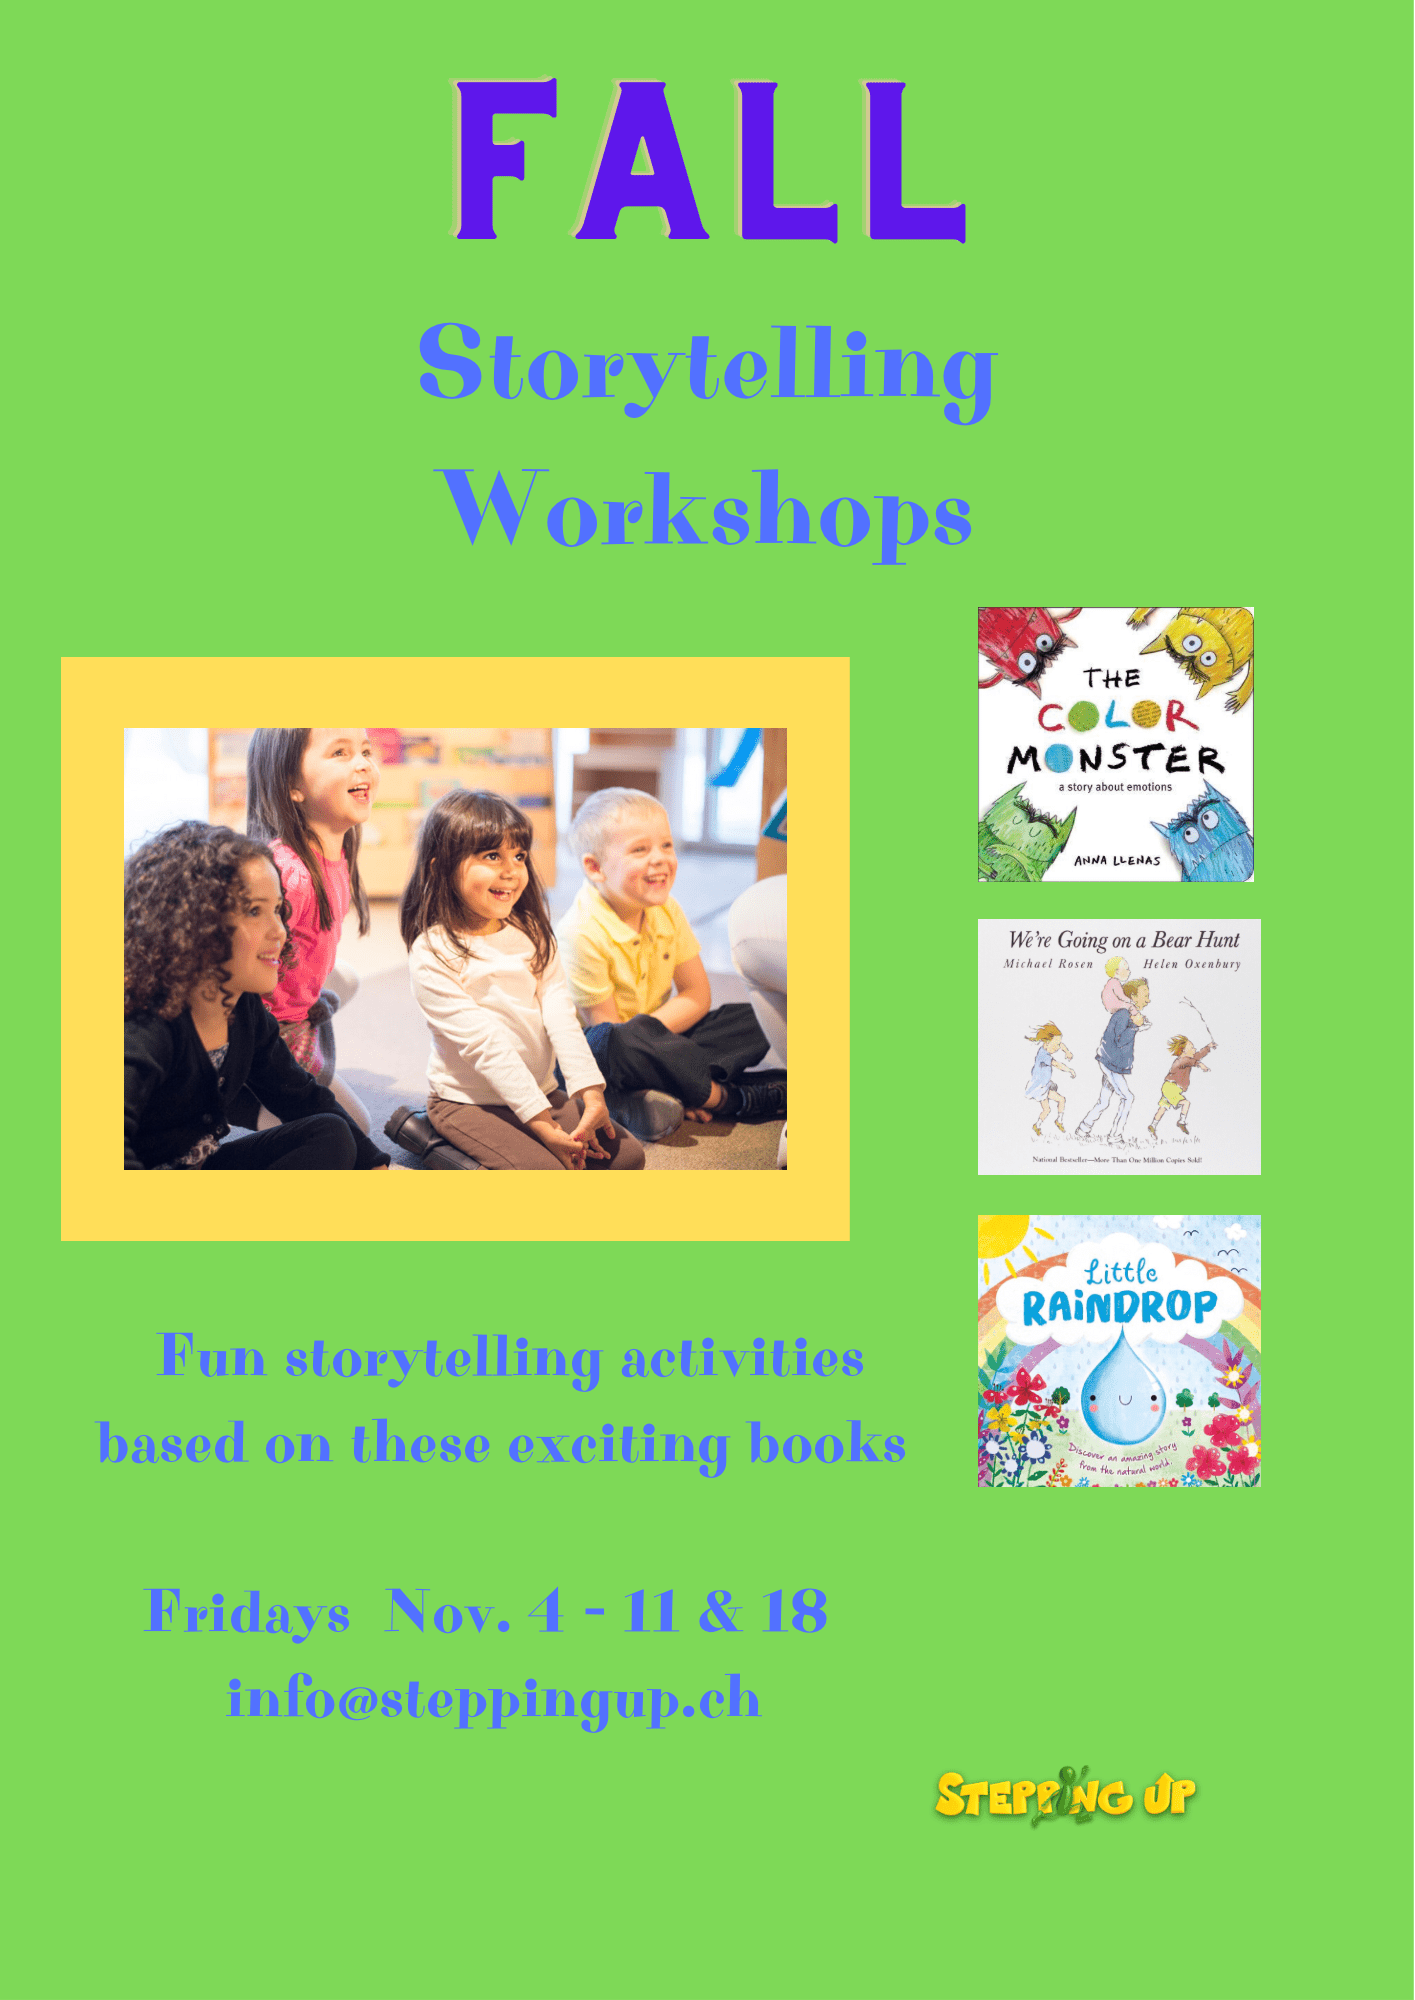 Fall Storytelling Workshop Stepping Up